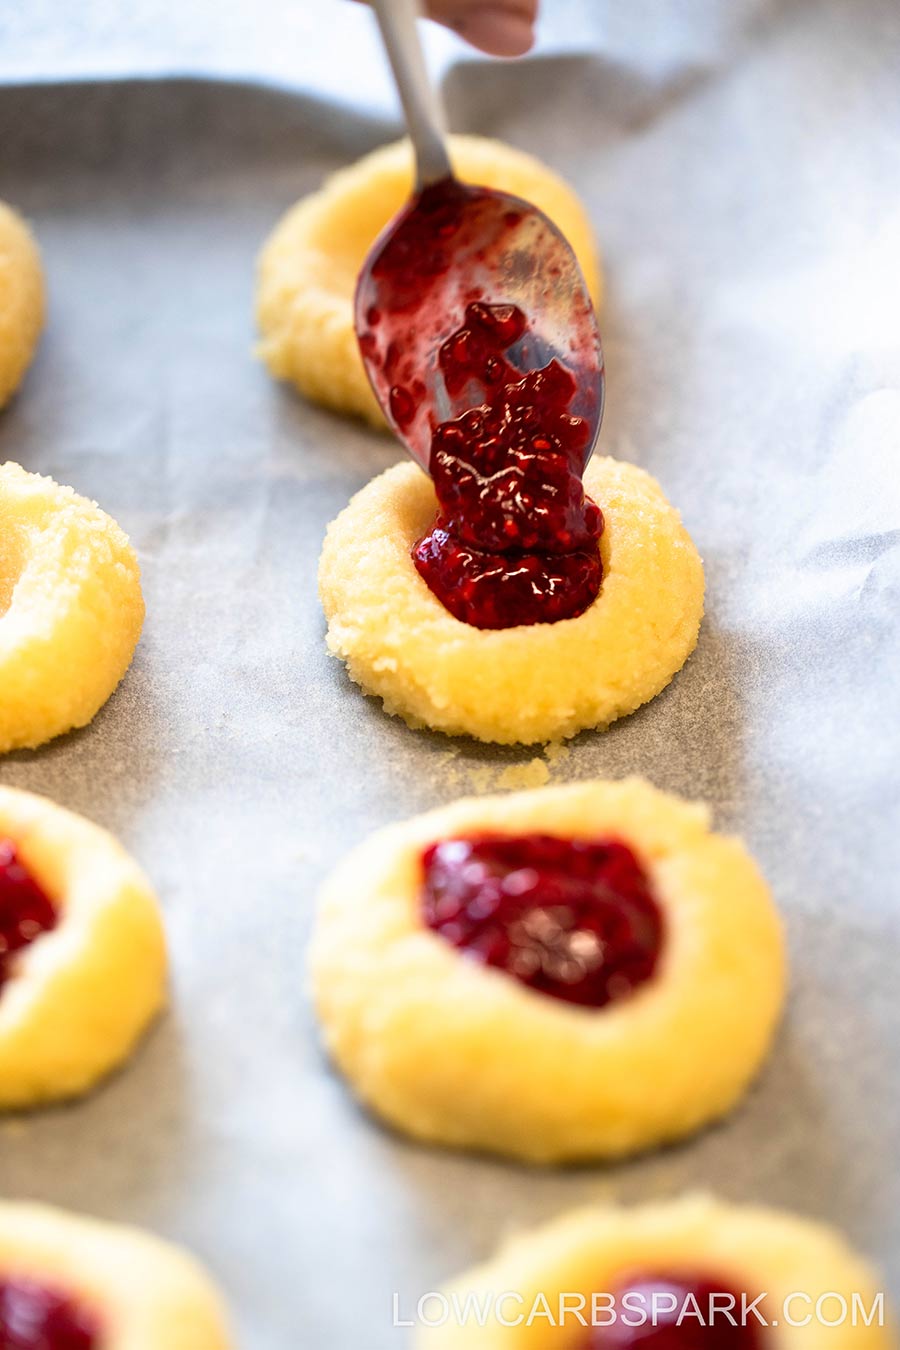 fill each cookie with jam